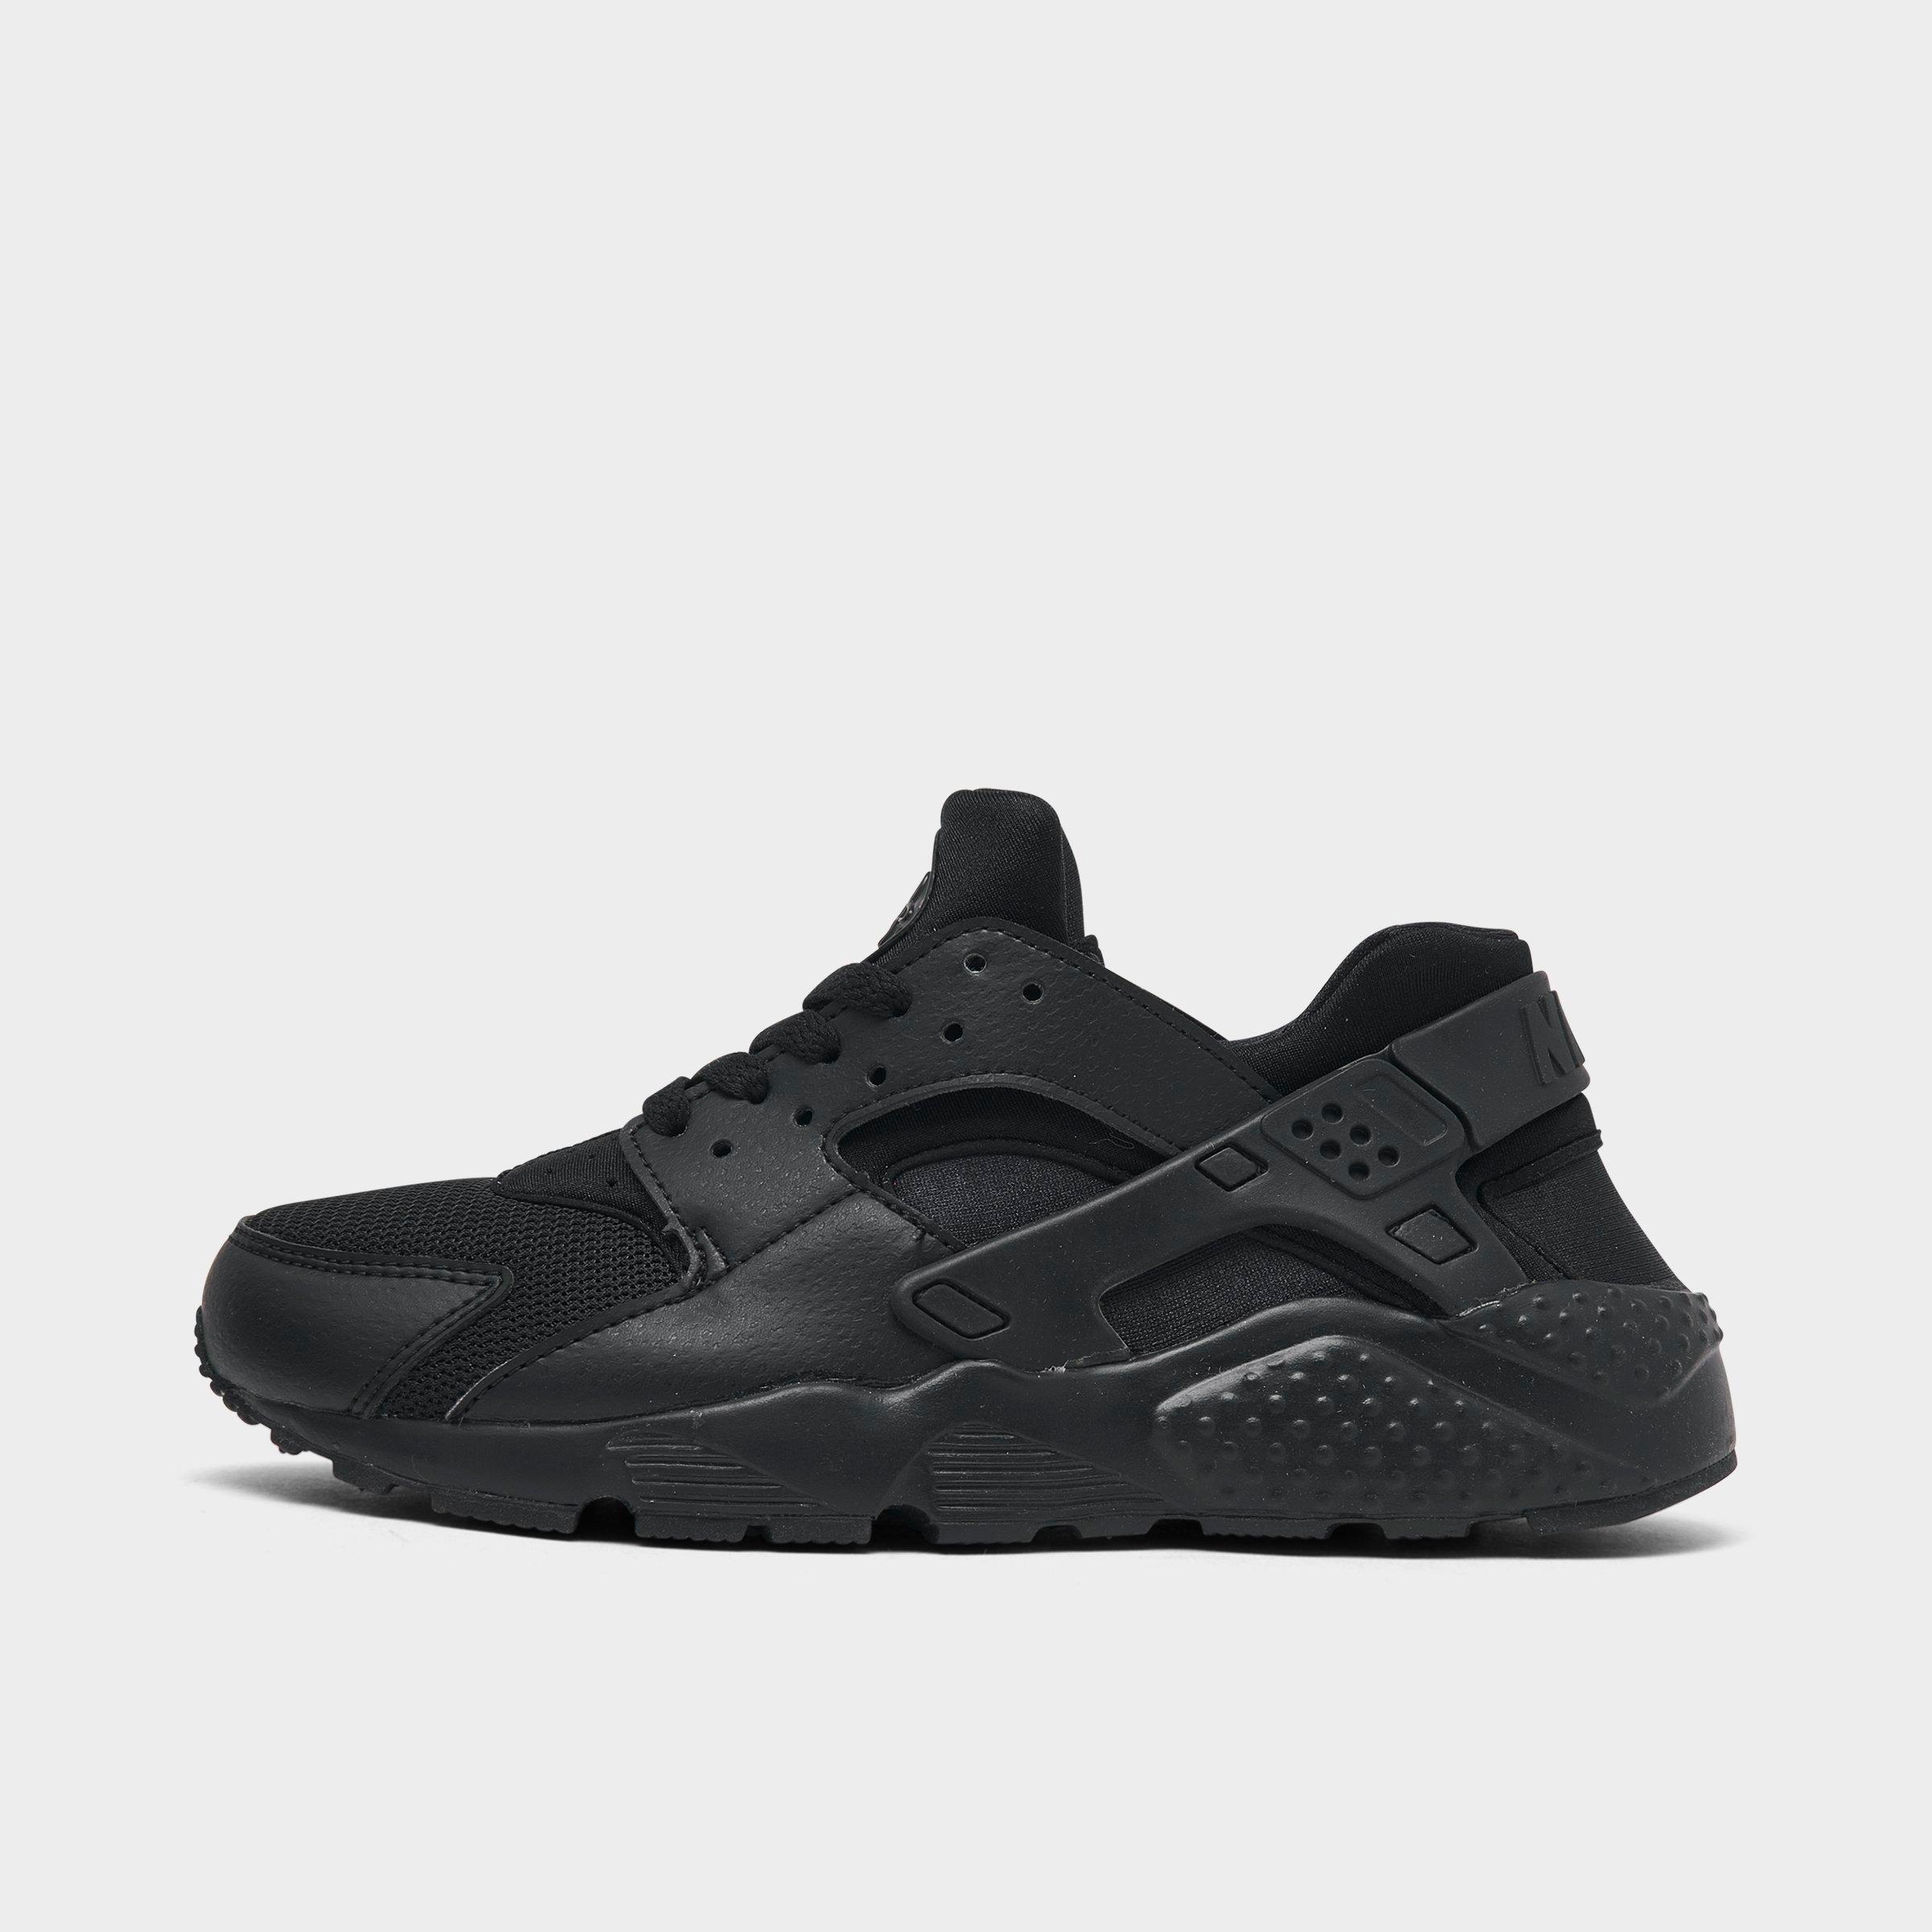 nike women's air huarache city low casual sneakers from finish line